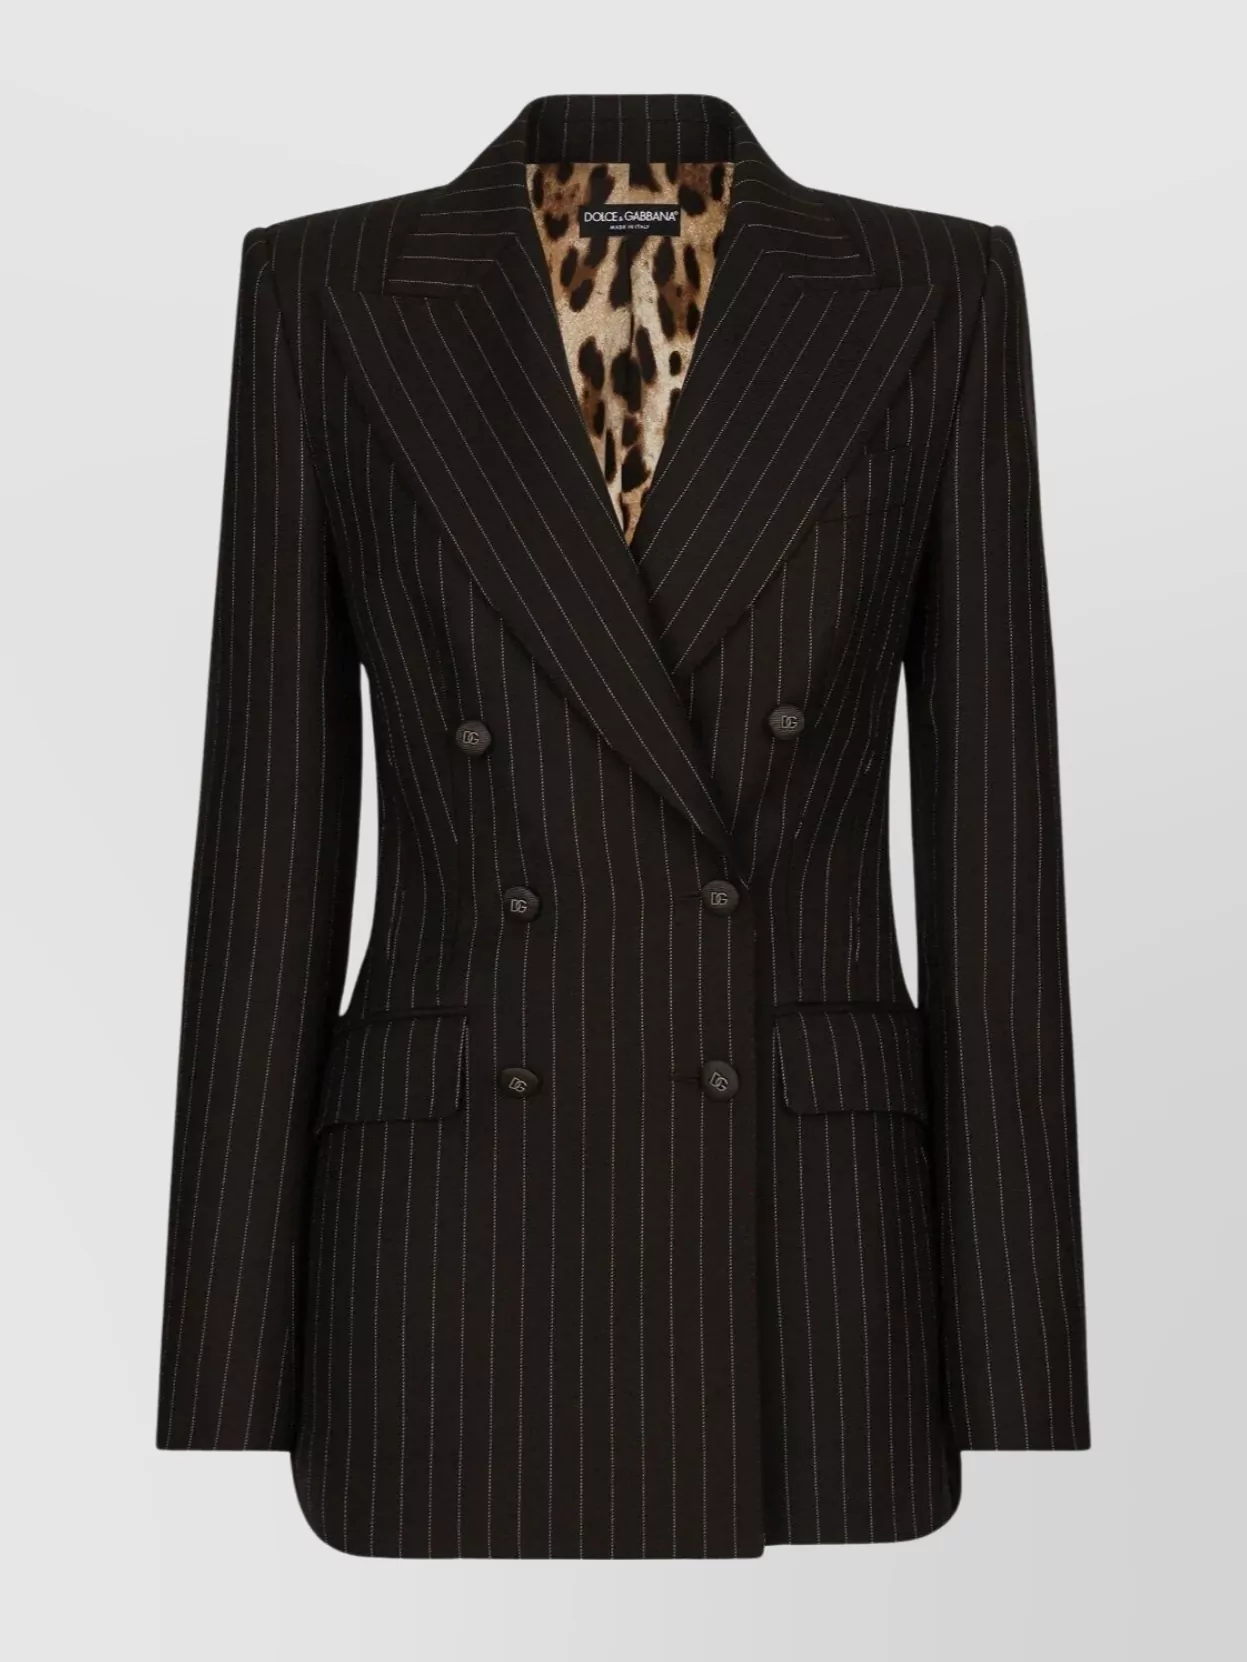 DOLCE & GABBANA PINSTRIPE DOUBLE-BREASTED SUIT SET